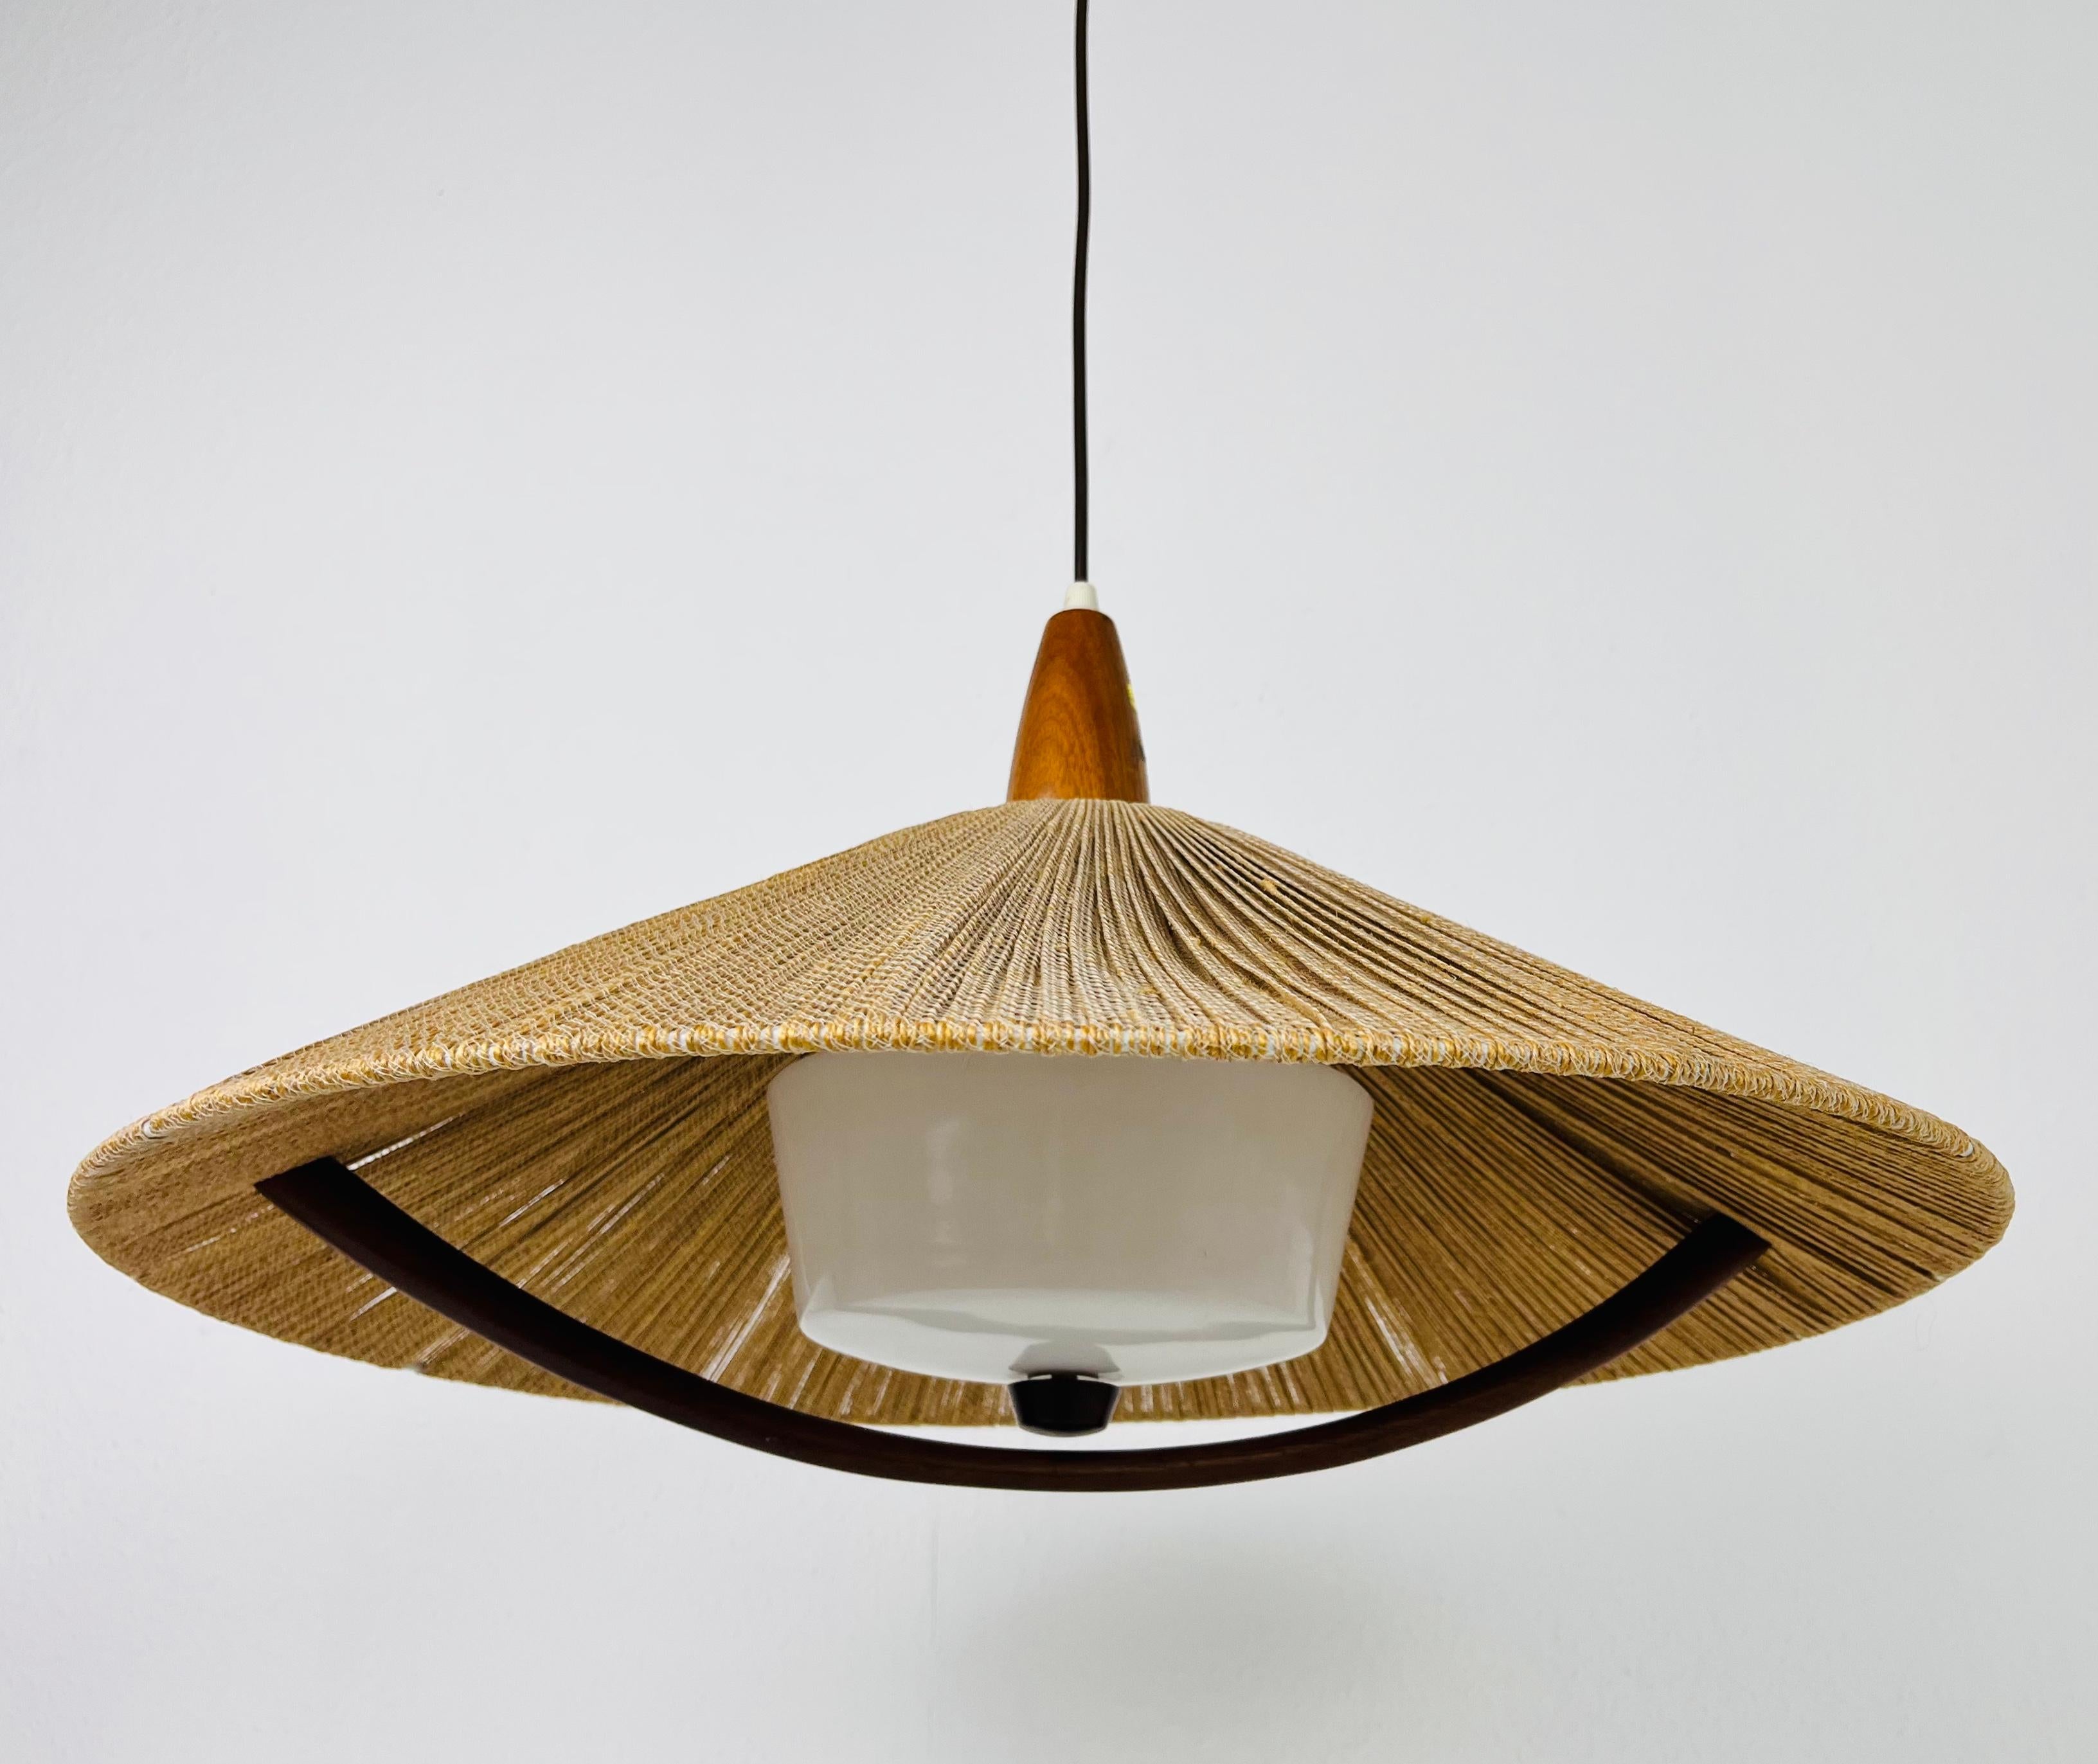 A wonderful teak hanging lamp made in the 1960s by Temde in Switzerland. It is fascinating with its rare lamp shade, which gives the lighting a wonderful japanese design.

The height is adjustable from 30 cm up to 110 cm.

The light requires one E27